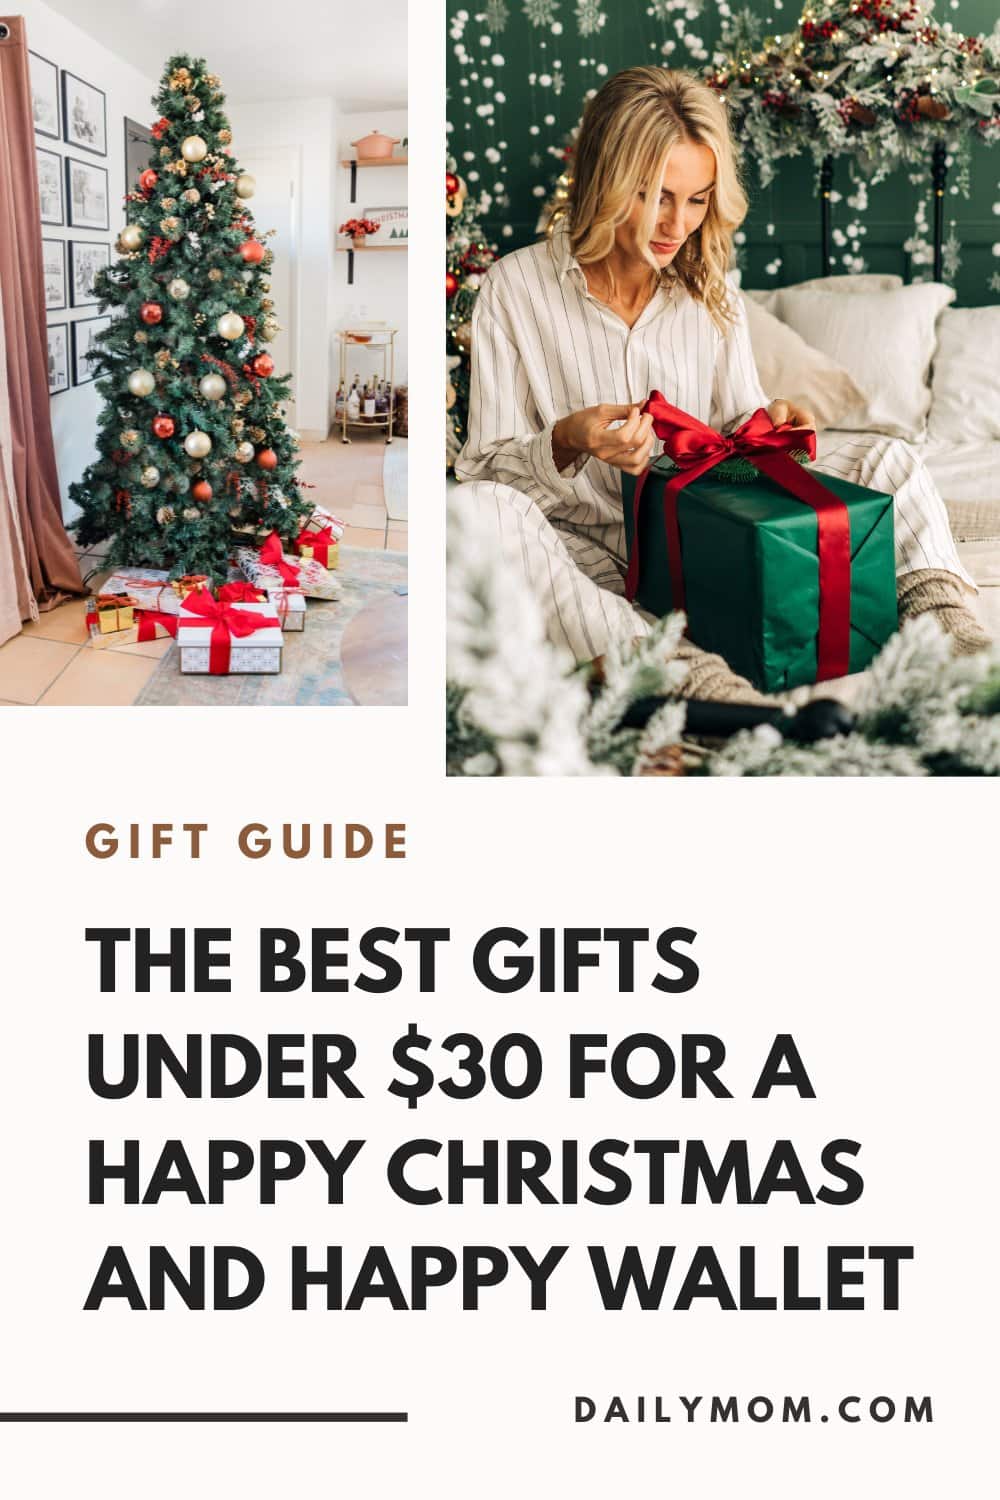 25 Of The Best Gifts Under $30 For A Happy Christmas And Happy Wallet 40 Daily Mom, Magazine For Families